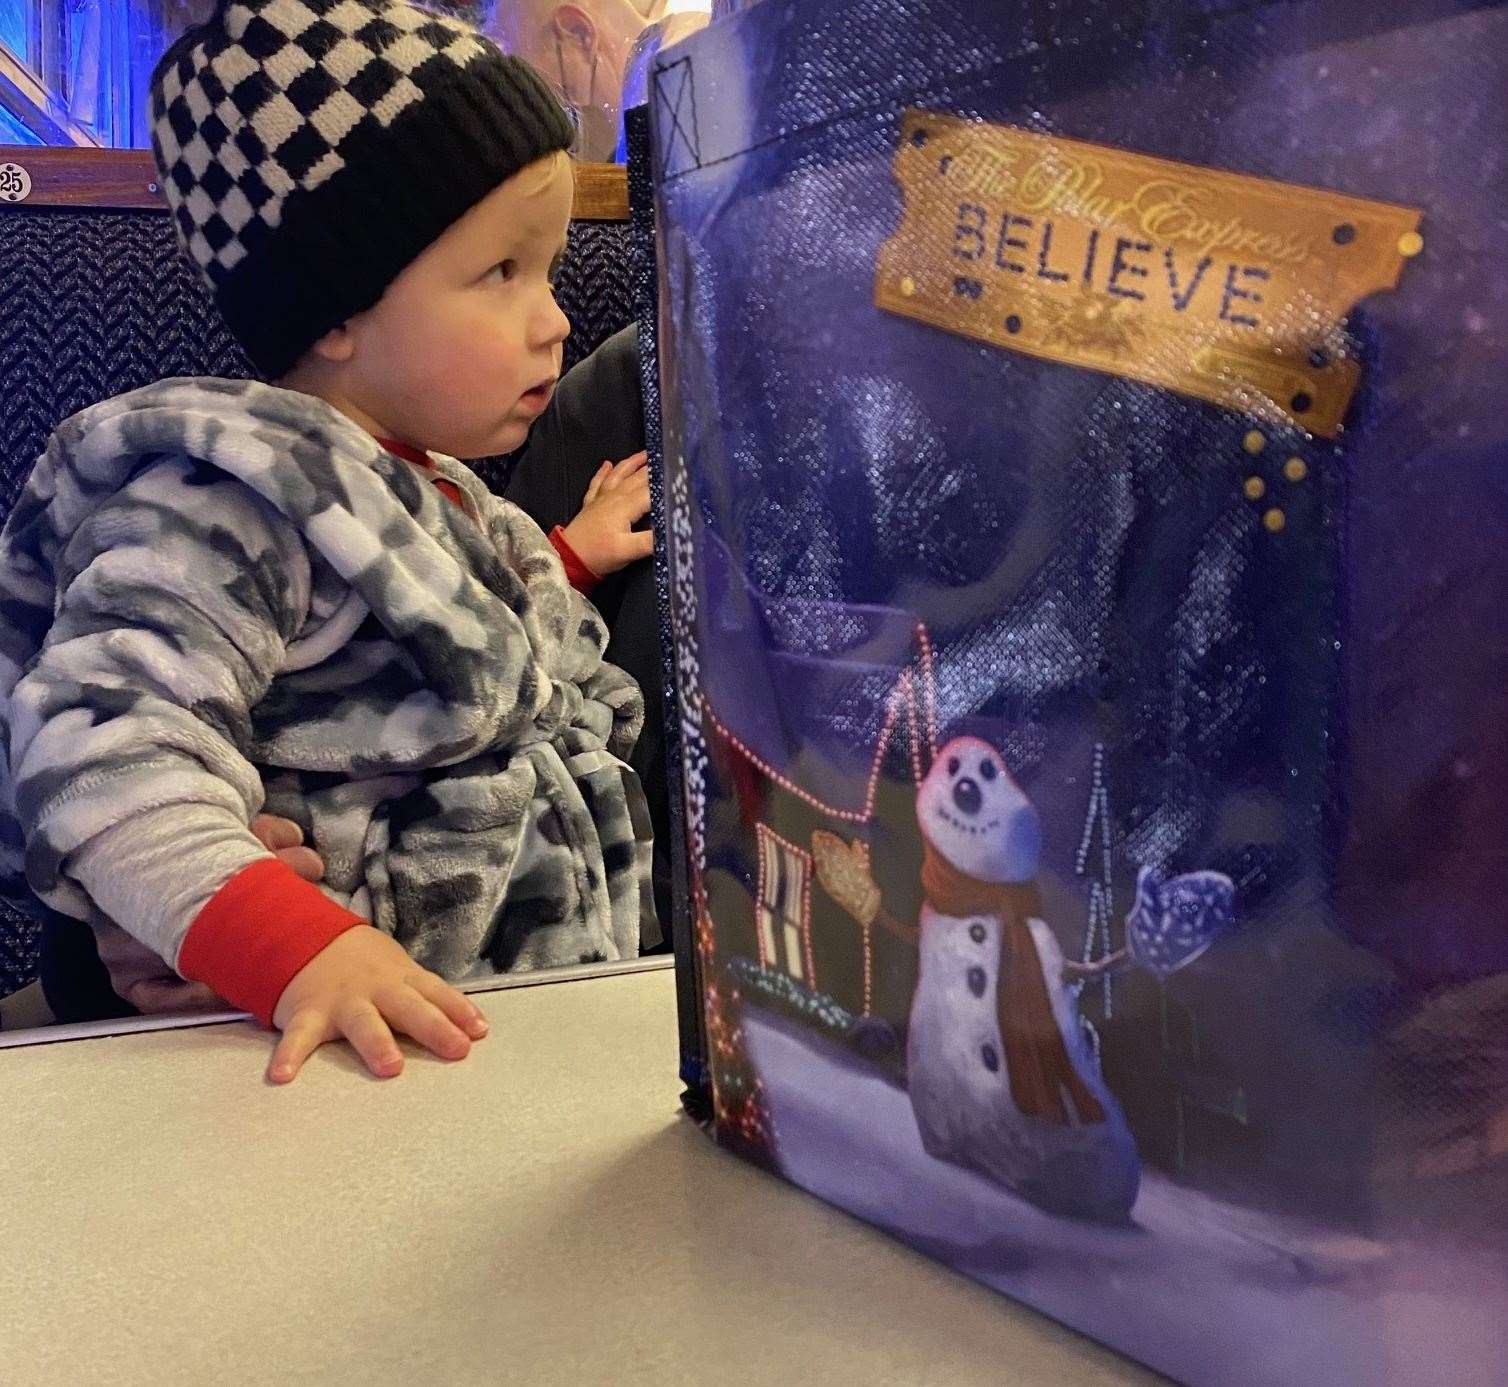 The magic onboard the Polar Express captivates young and old alike